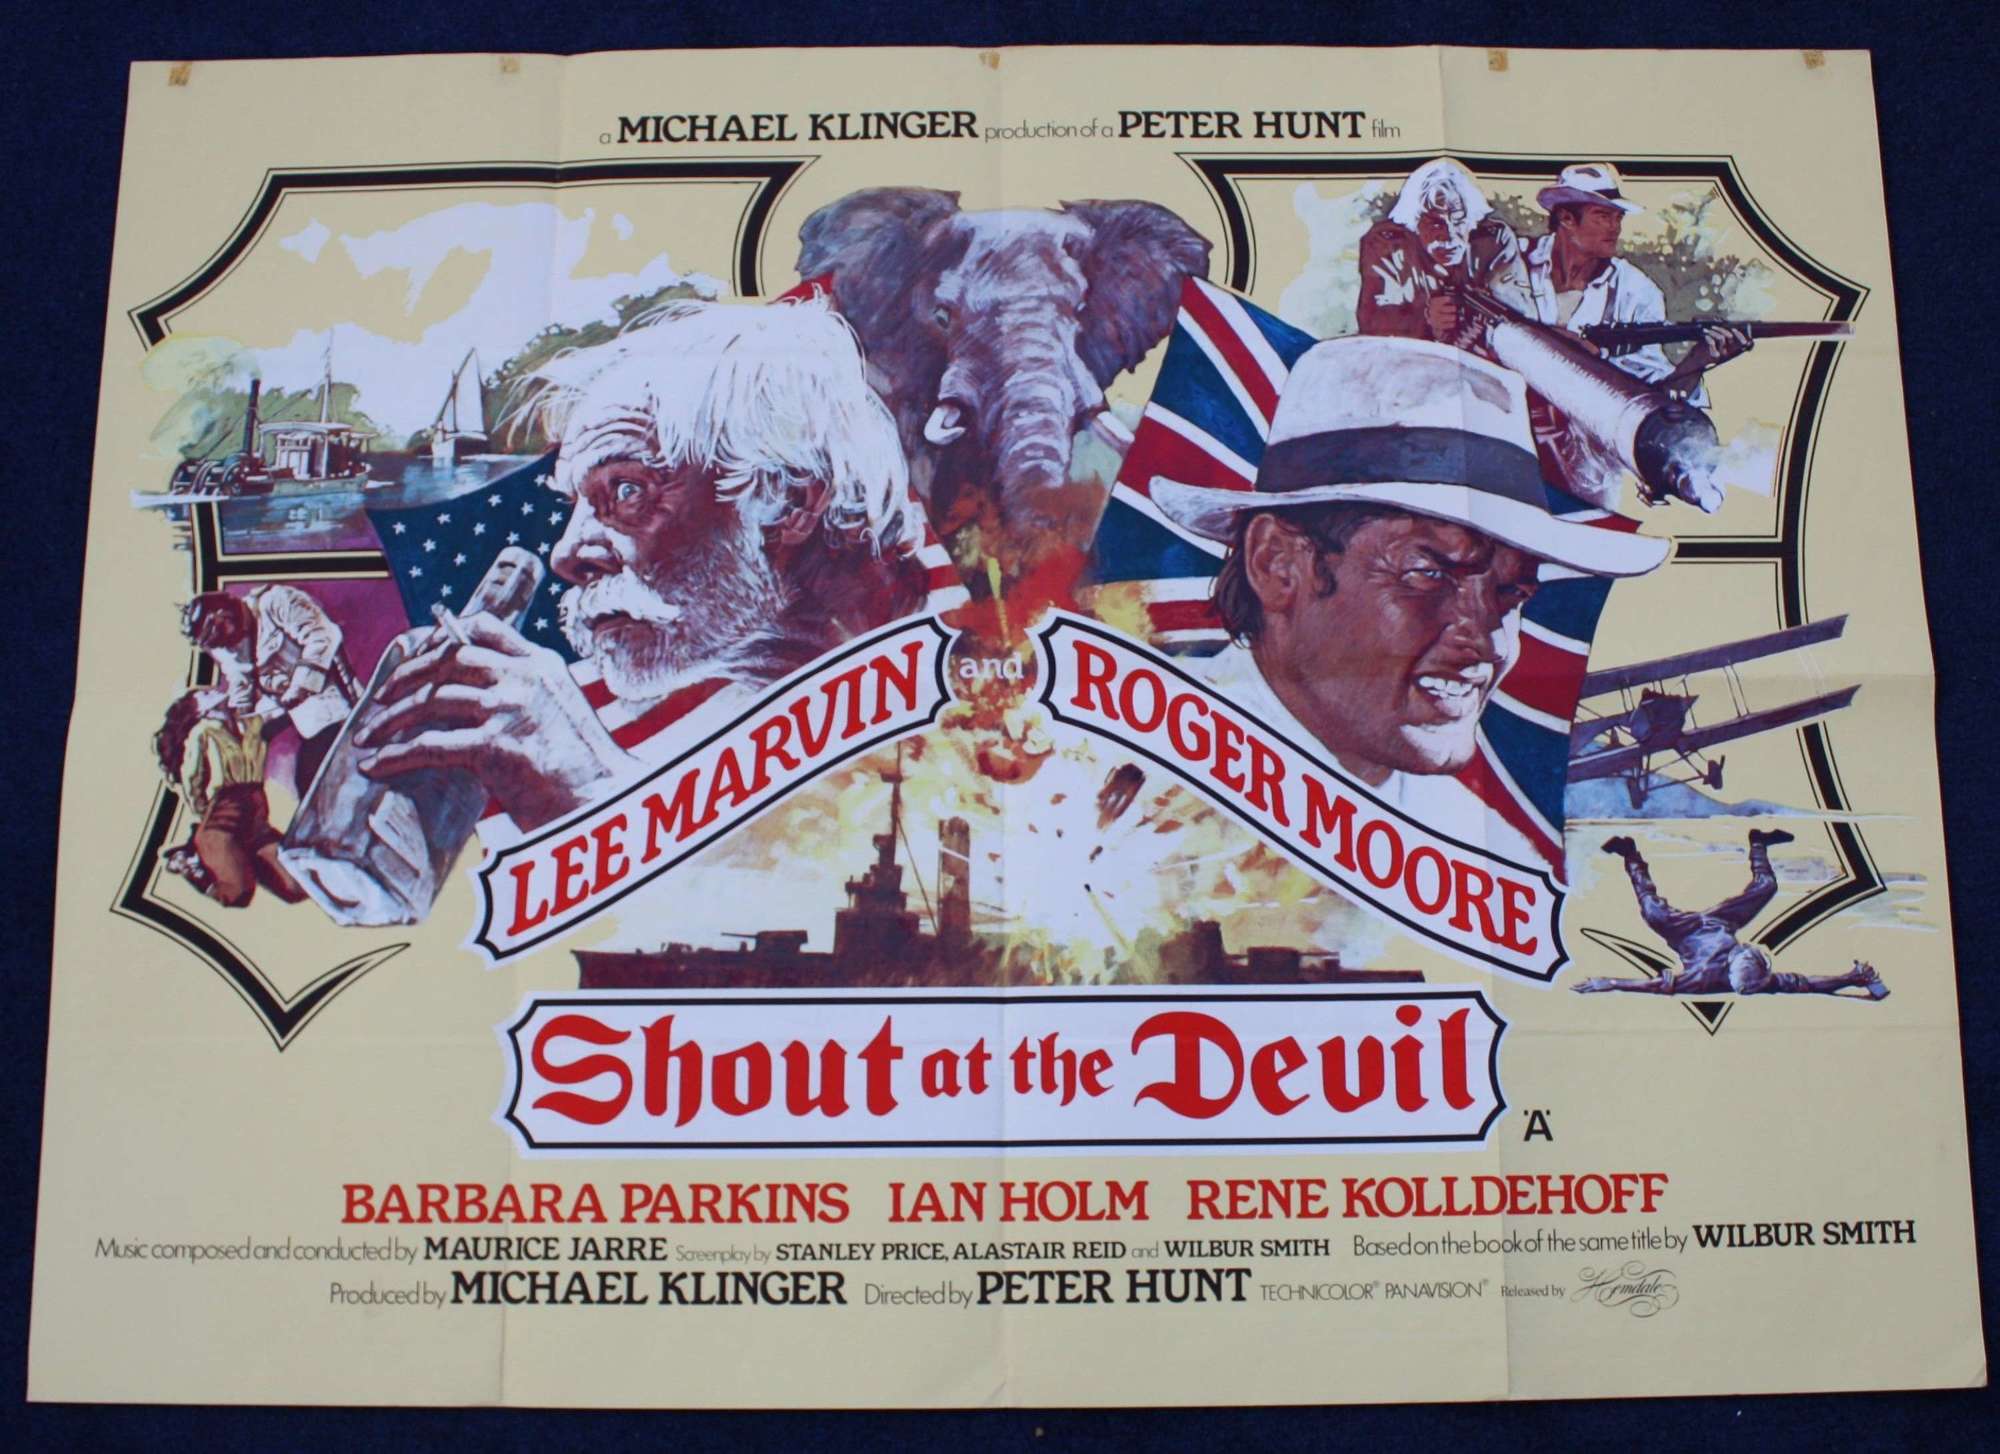 Original 40 x 30 inches Movie/ Film Poster: 'Shout at the Devil'